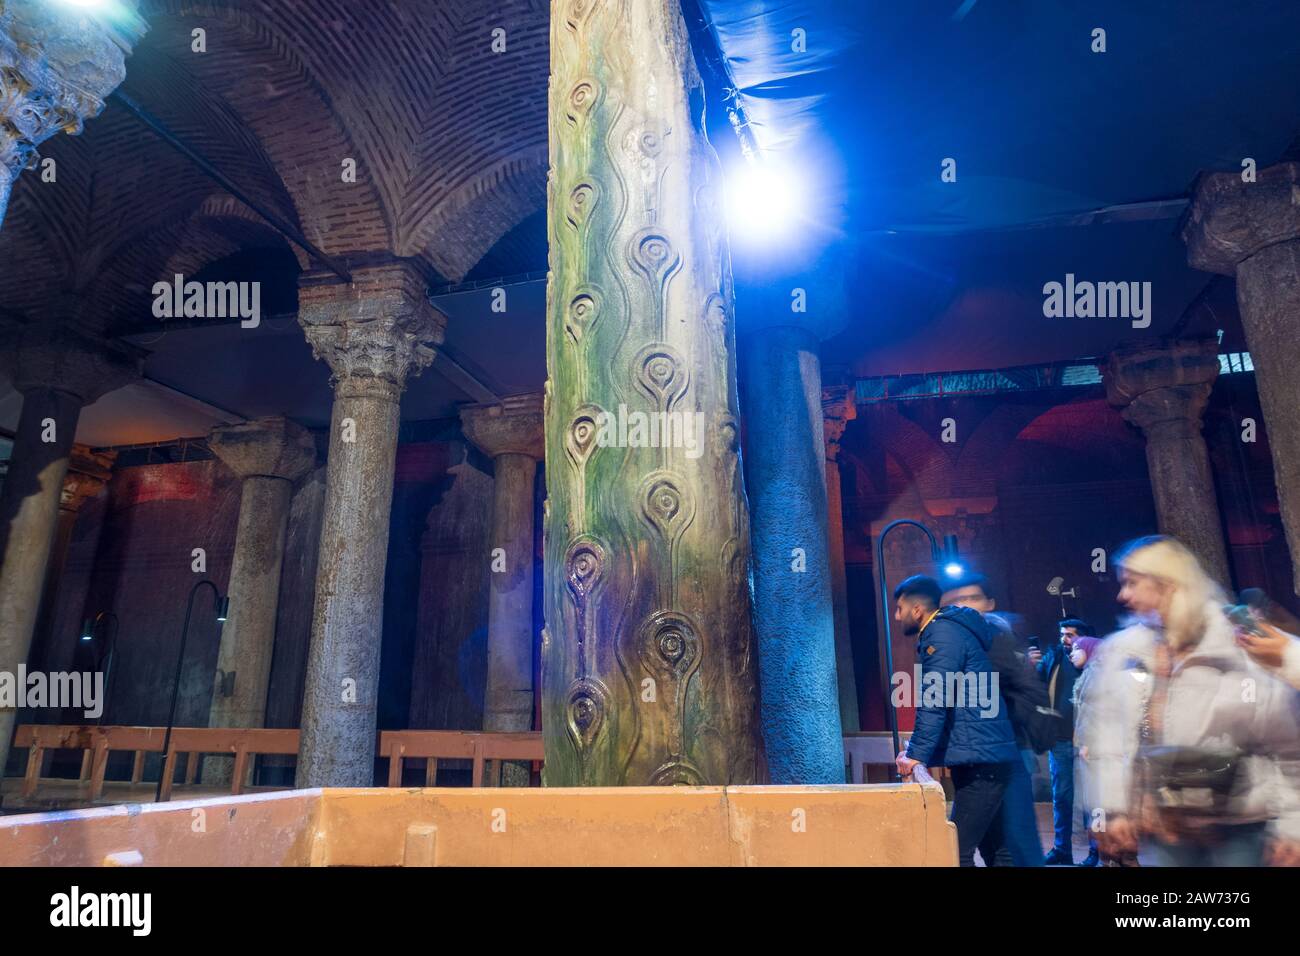 Istanbul, Turkey - Jan 14, 2020: The Basilica Cistern The Hen's Eye column is engraved with thousands of eyes, which at times appear to be weeping as Stock Photo